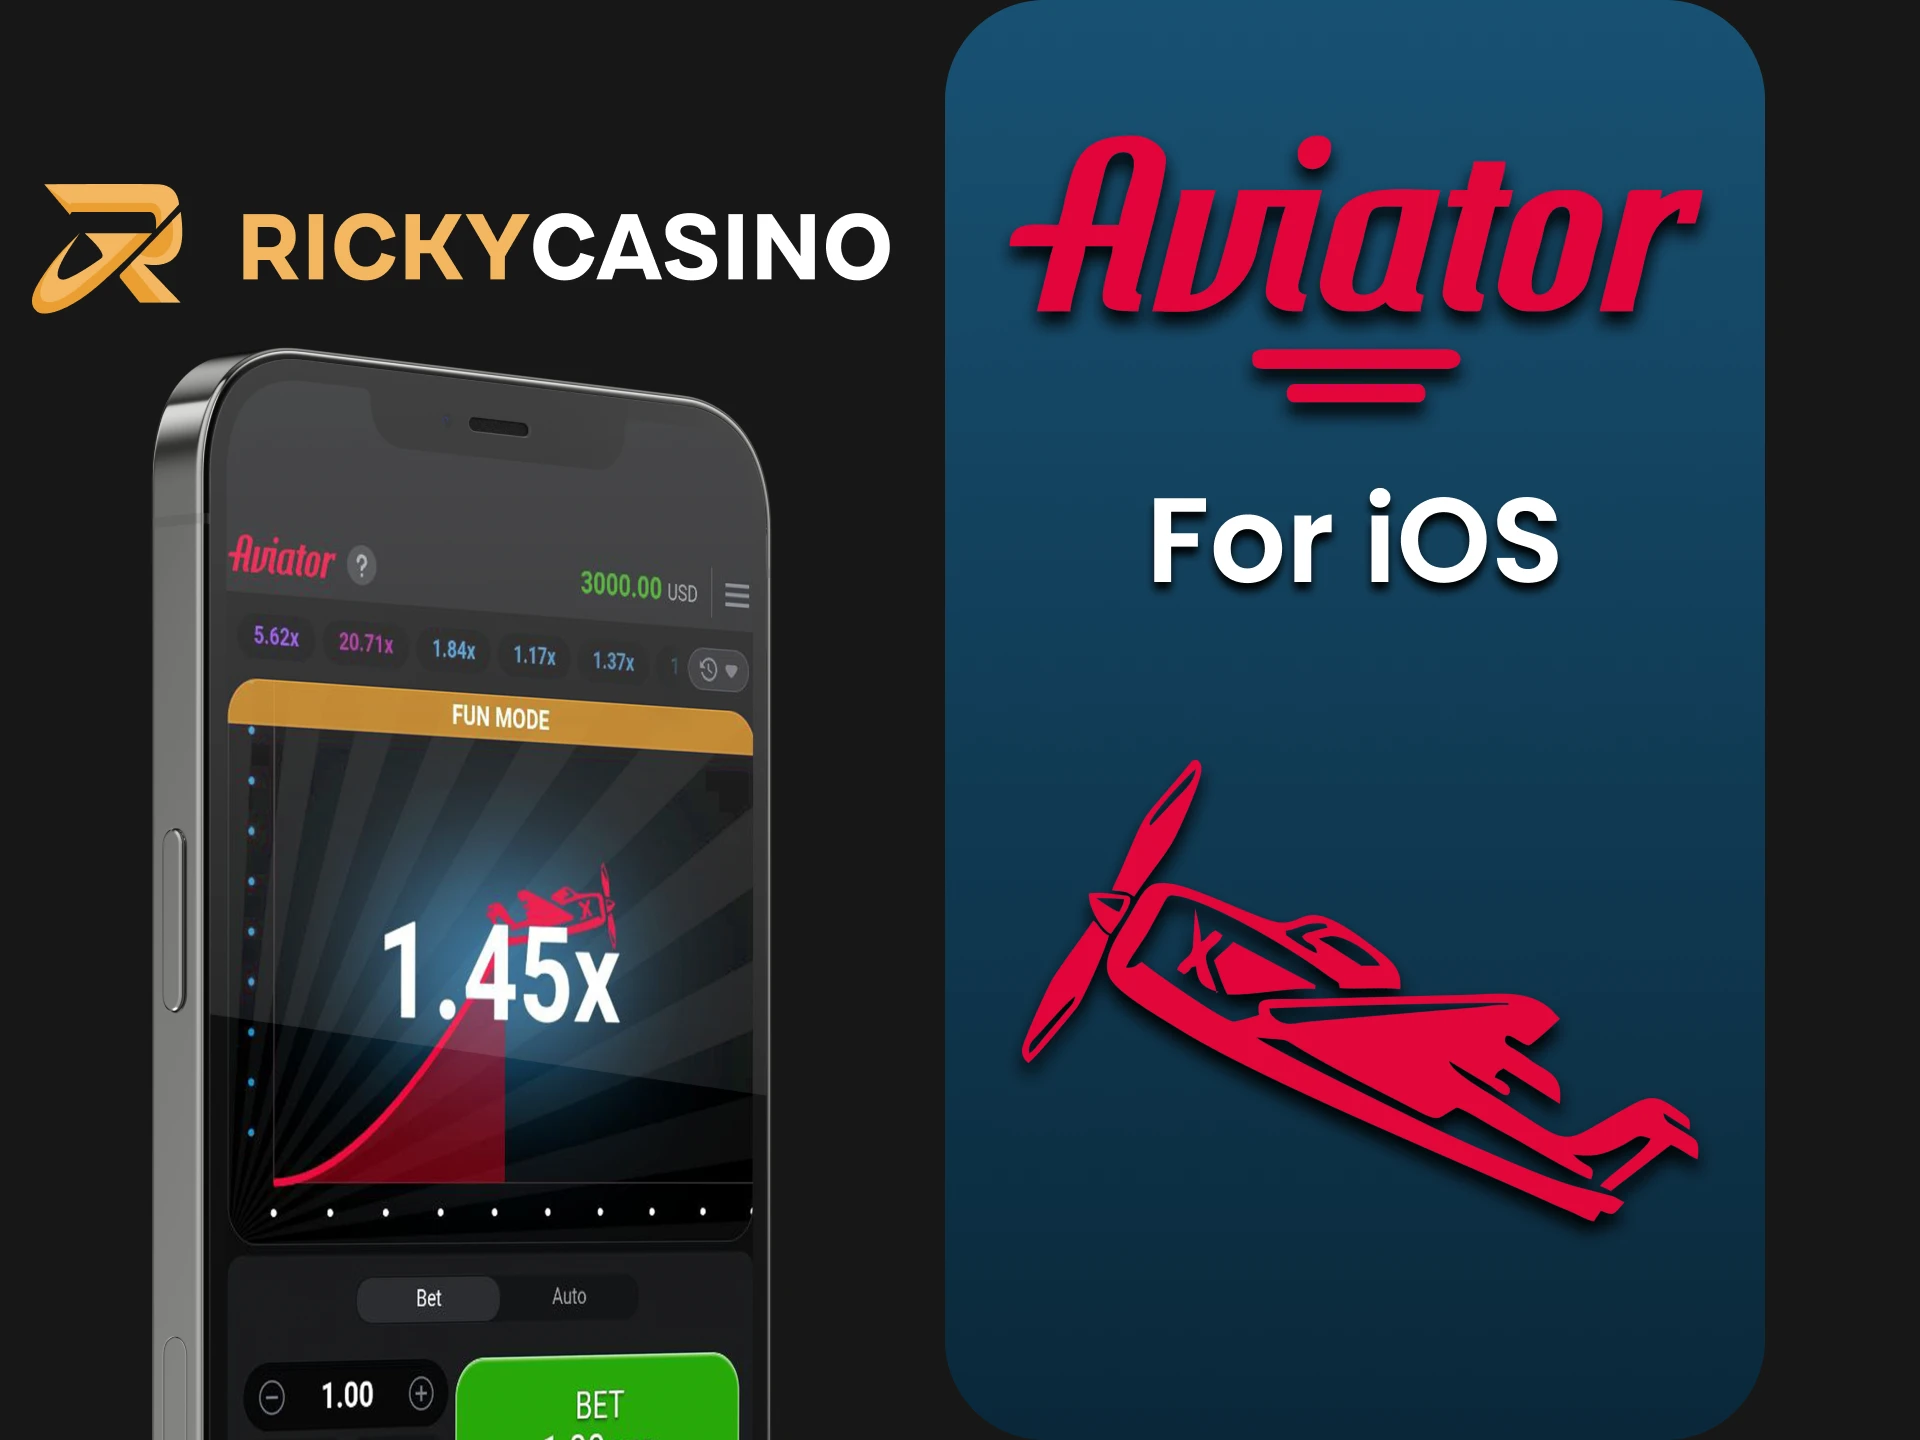 Play Aviator in the Ricky Casino app on iOS devices.